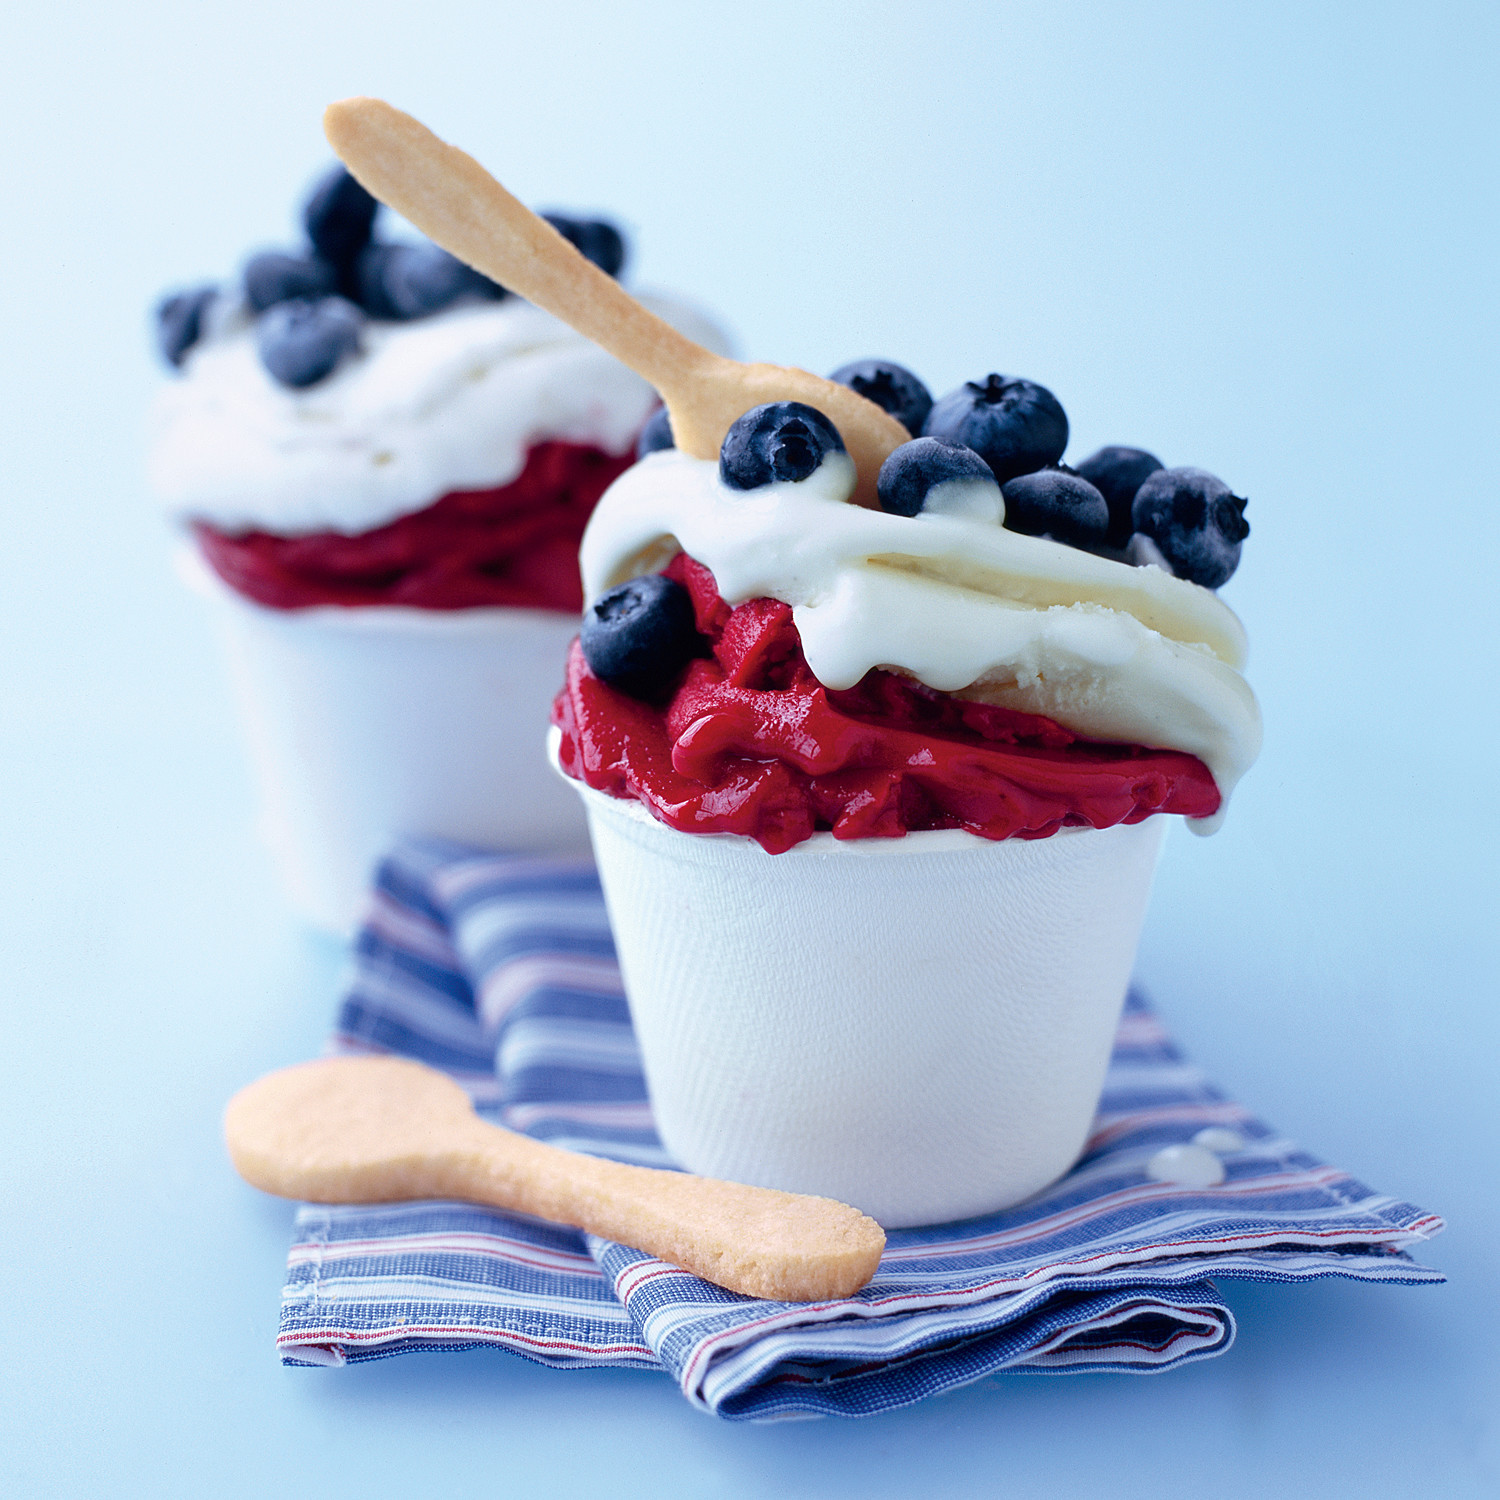 Martha Stewart Easter Desserts
 Most Pinned Red White and Blue Dessert Recipes